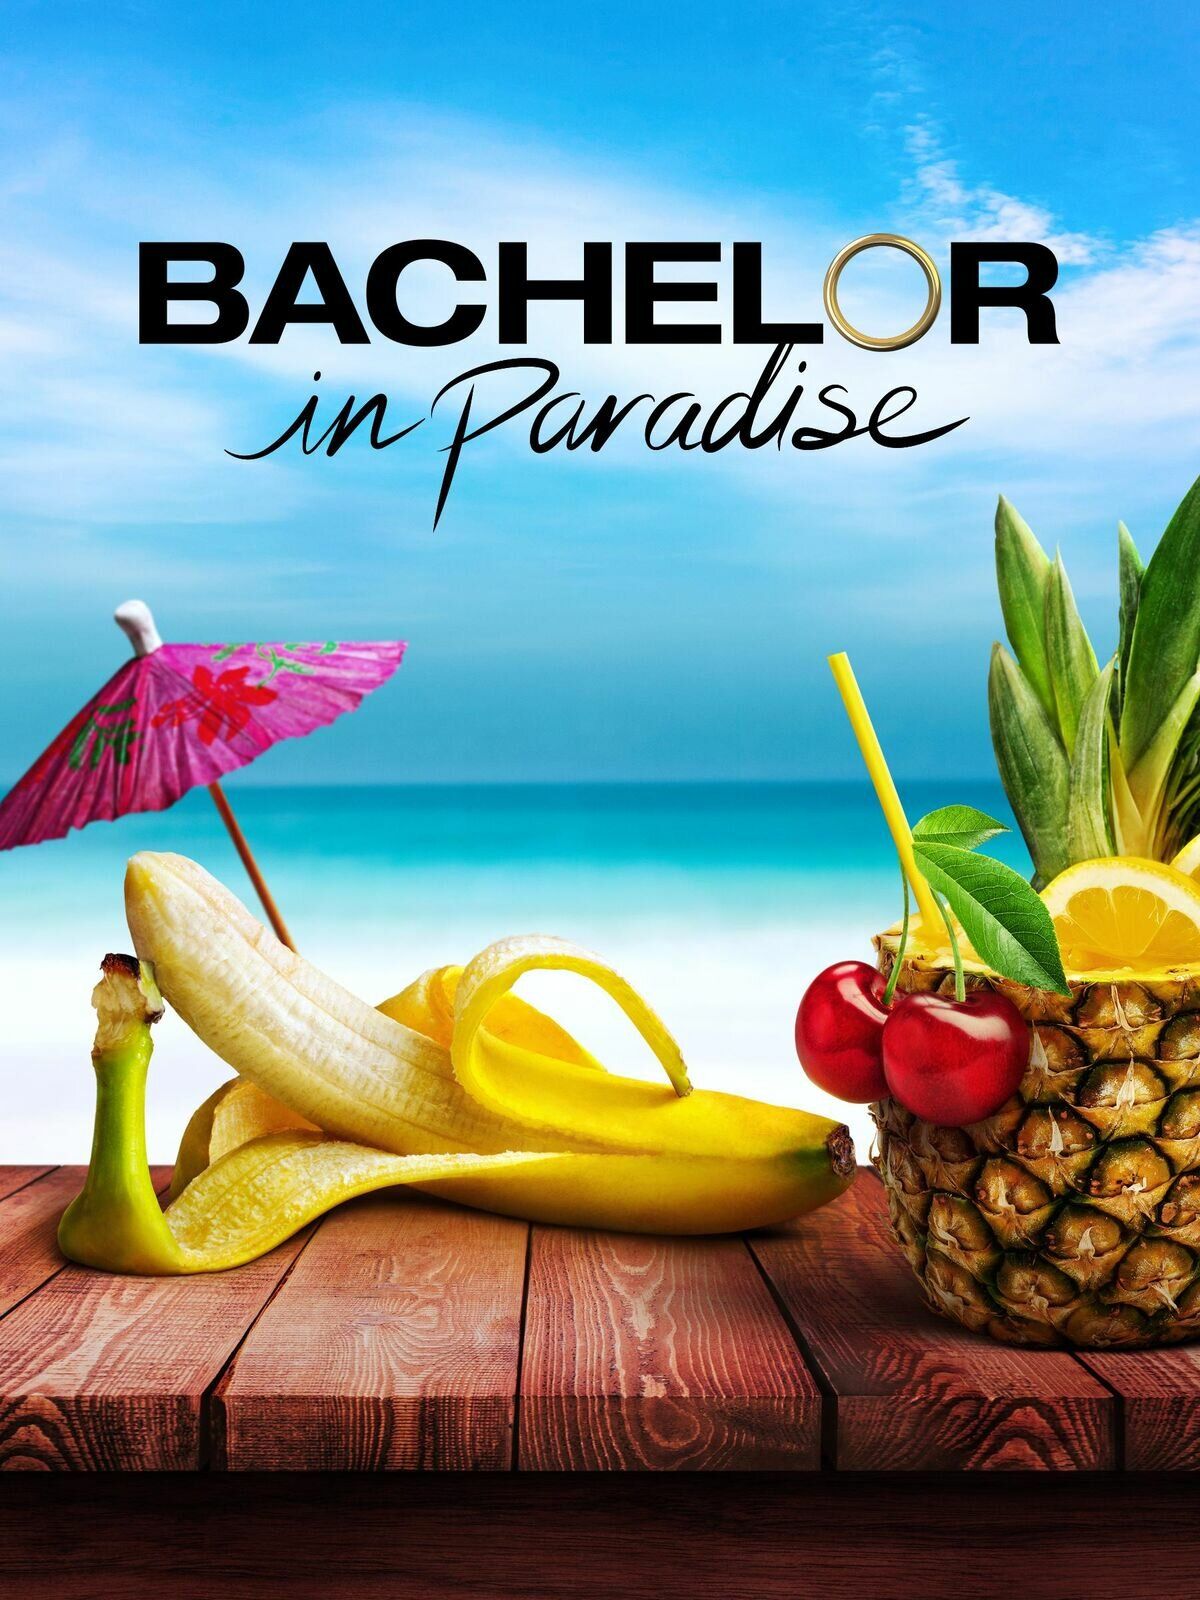 Bachelor in Paradise TV Show Poster